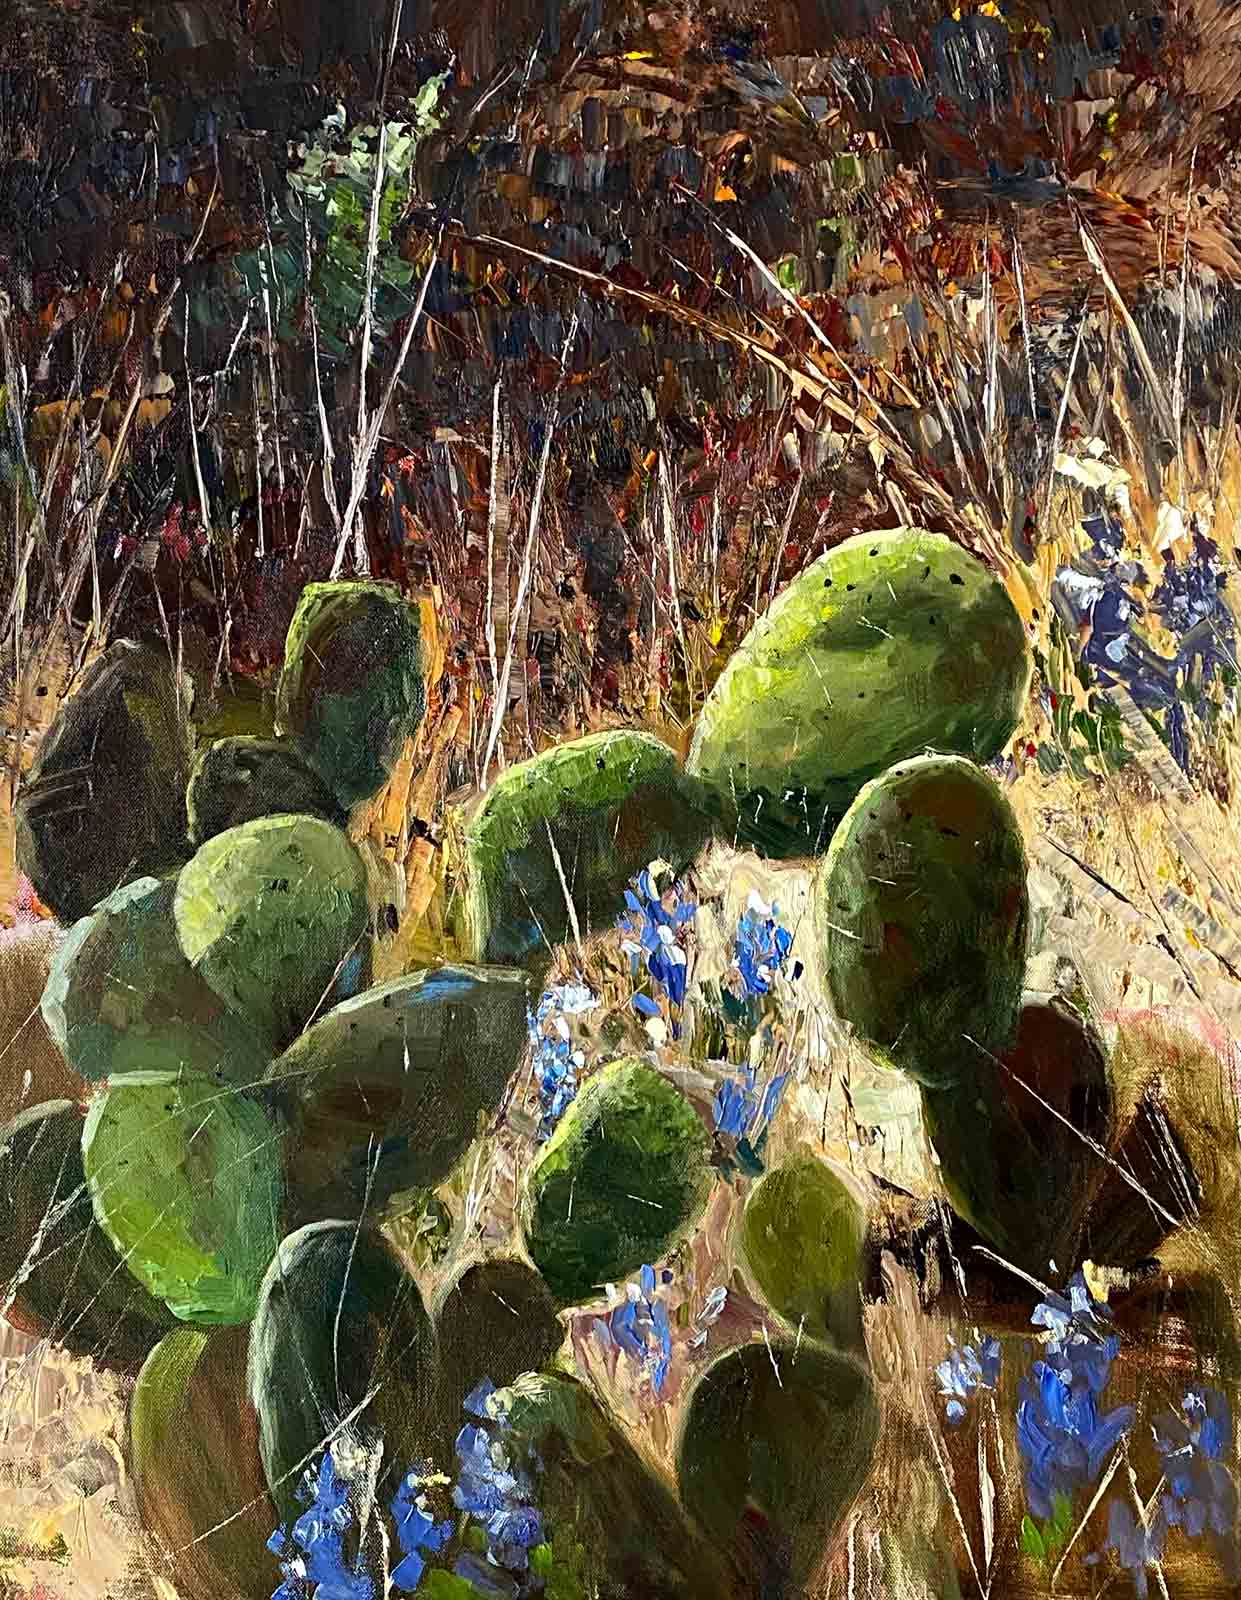 Oil painting of Texas cactus by impressionist artist Shelly Wierzba.